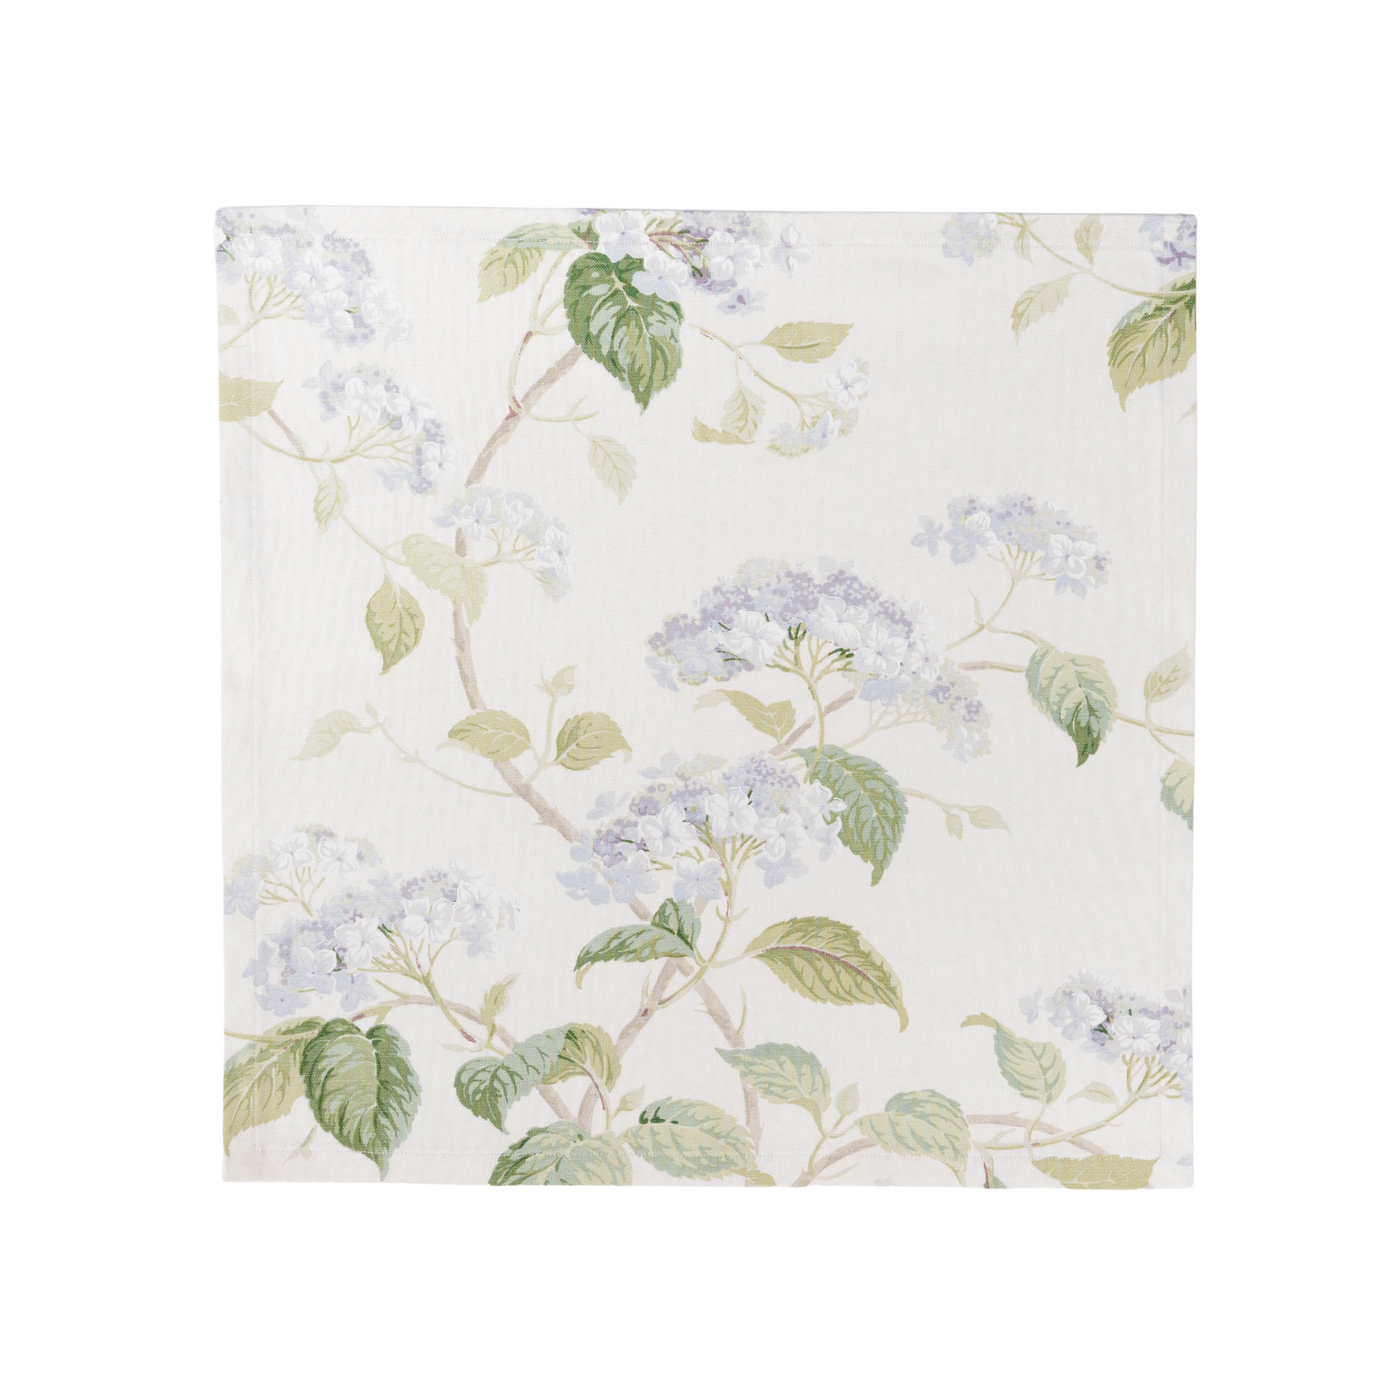 Colefax & Fowler Summerby Dinner Napkin - Maxine Makes